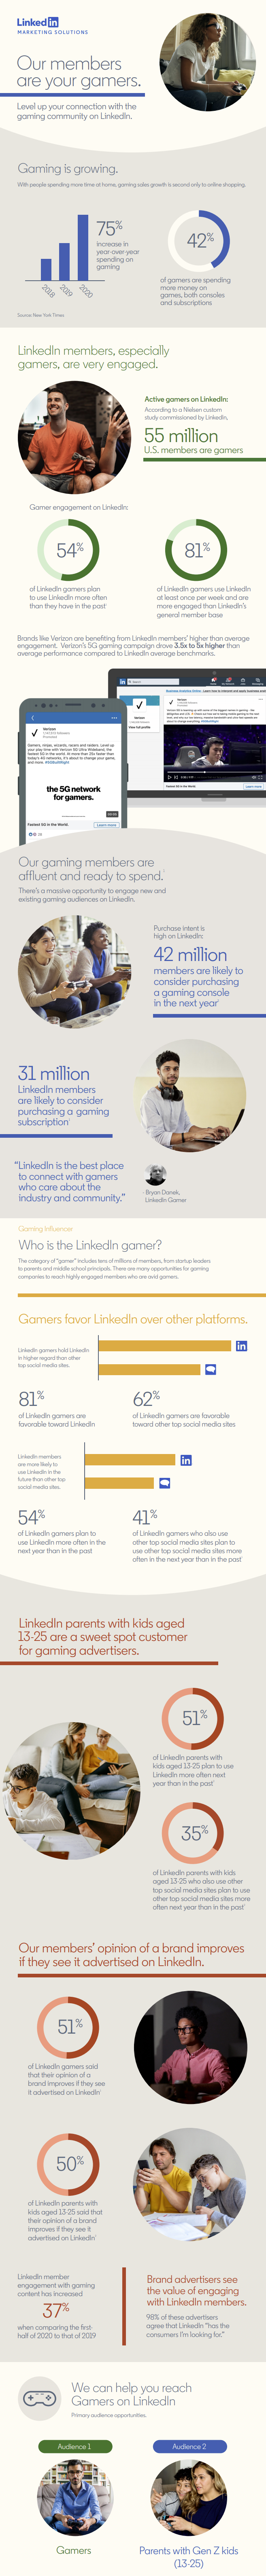 linkedin shares new insights on how to target gamers with linkedin campaigns infographic